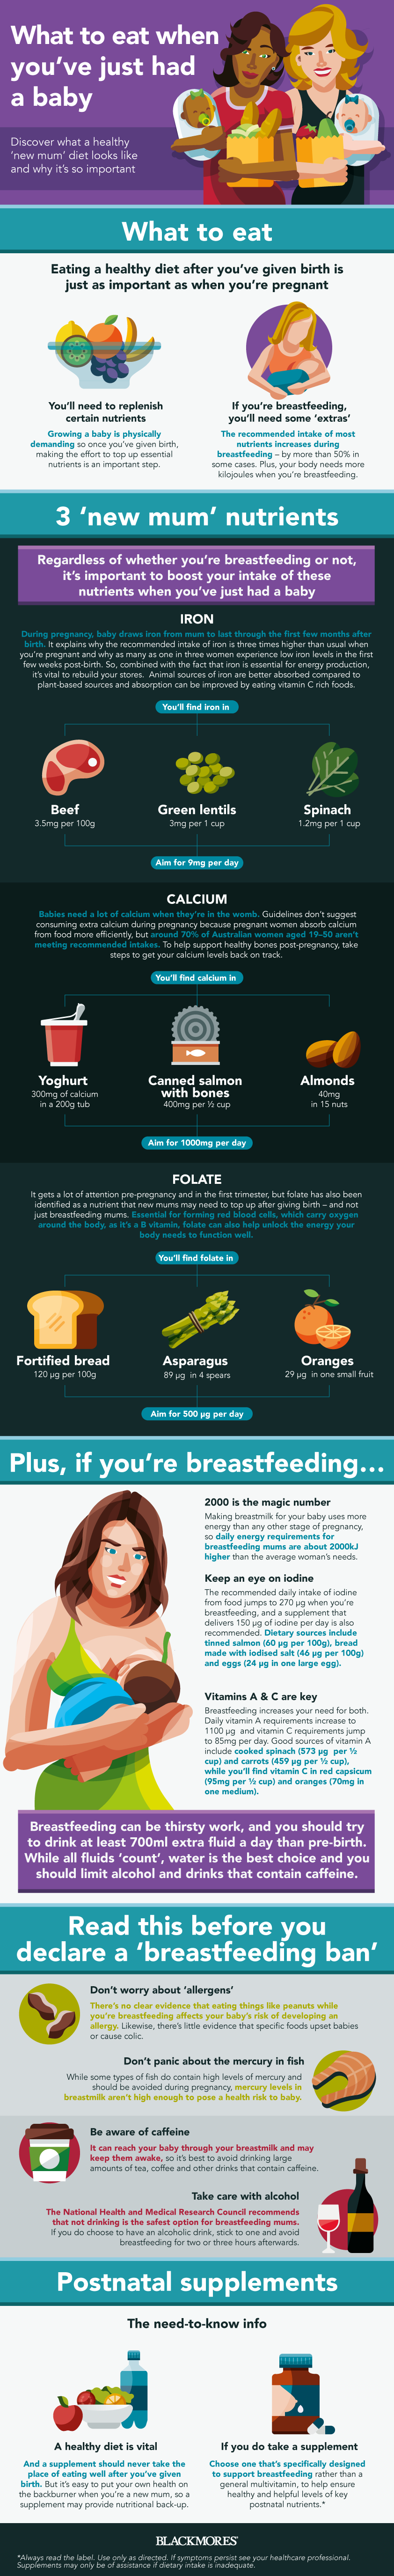 What to eat when you've just had a baby | INFOGRAPHIC by Blackmores